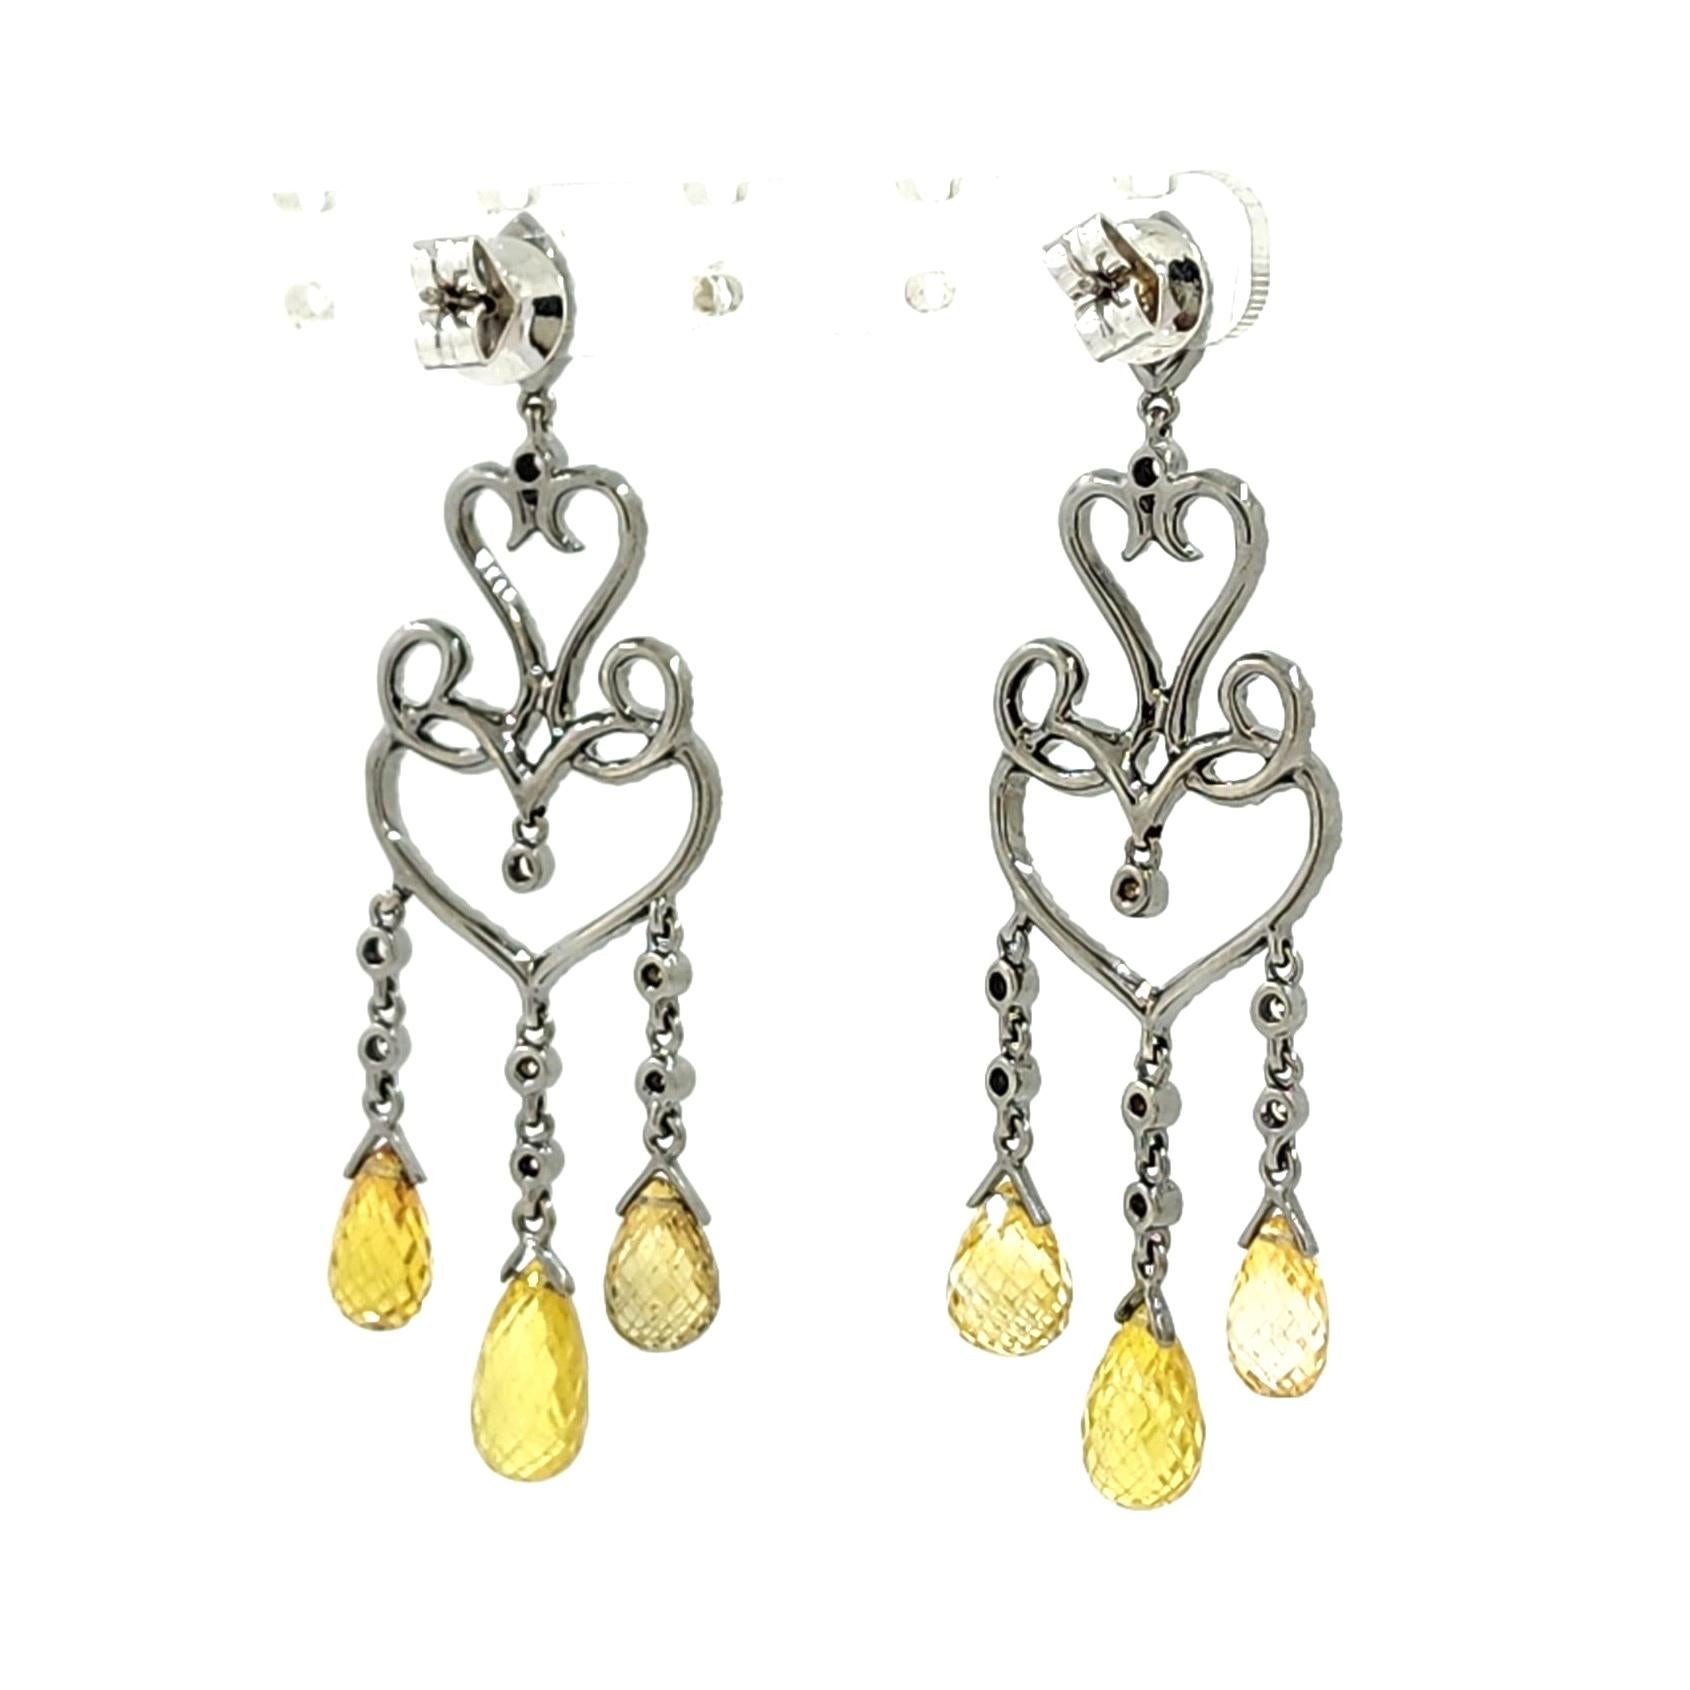 Introducing our exquisite Vintage 16.83ct Fancy Yellow Sapphire Briolettes and Diamond Dangle Drop Earrings in 18K White Gold. These earrings are a true testament to the beauty and rarity of natural gemstones, designed to make a bold and glamorous